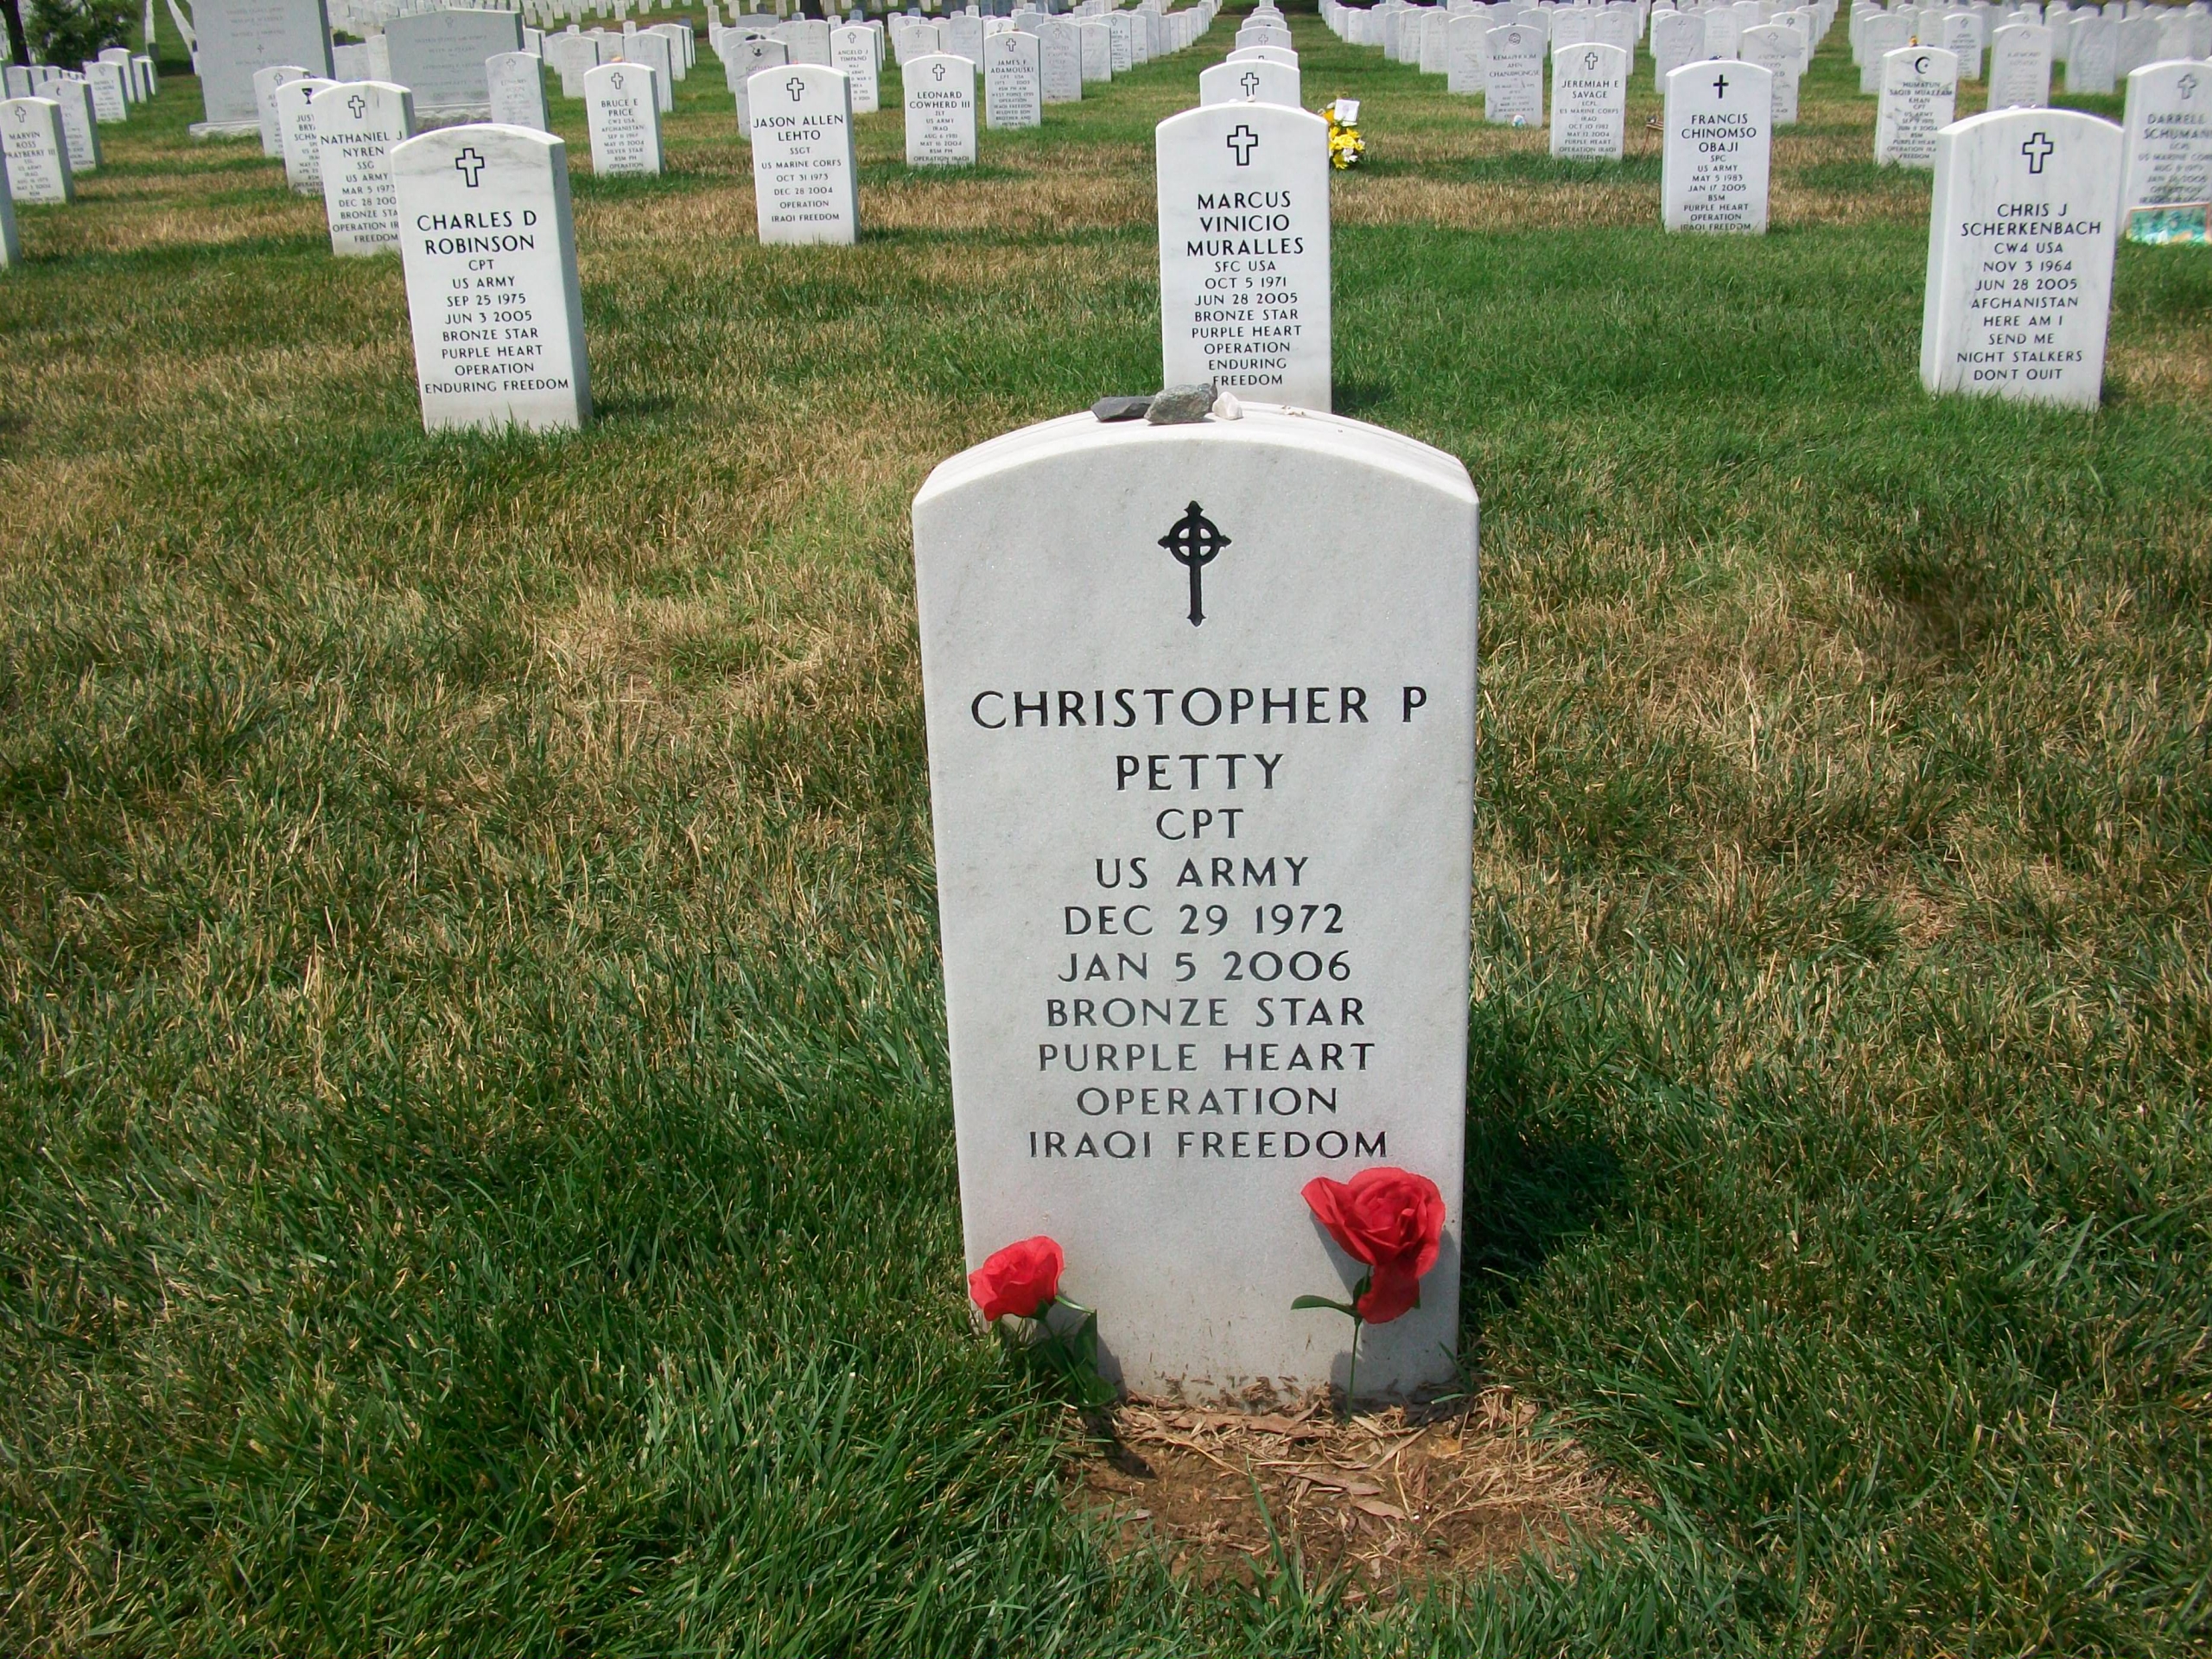 cppetty-gravesite-photo-by-mrpatterson-07042011-001